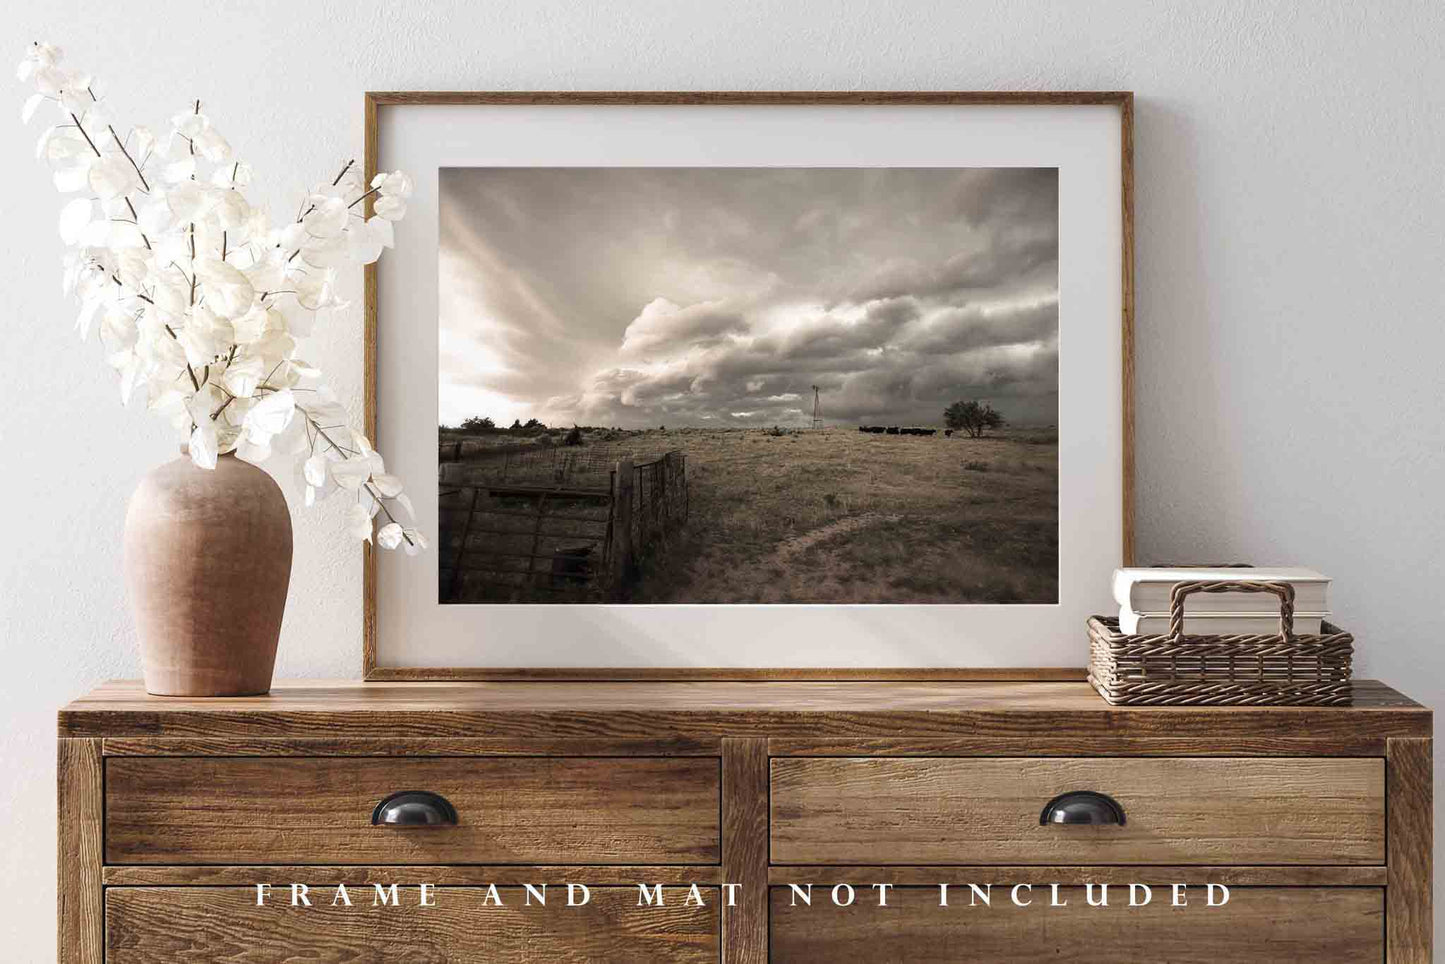 Western Photography Print - Wall Art Picture of Storm Clouds Over Country Landscape on Stormy Day in Oklahoma Windmill Cattle Pen Farm Decor